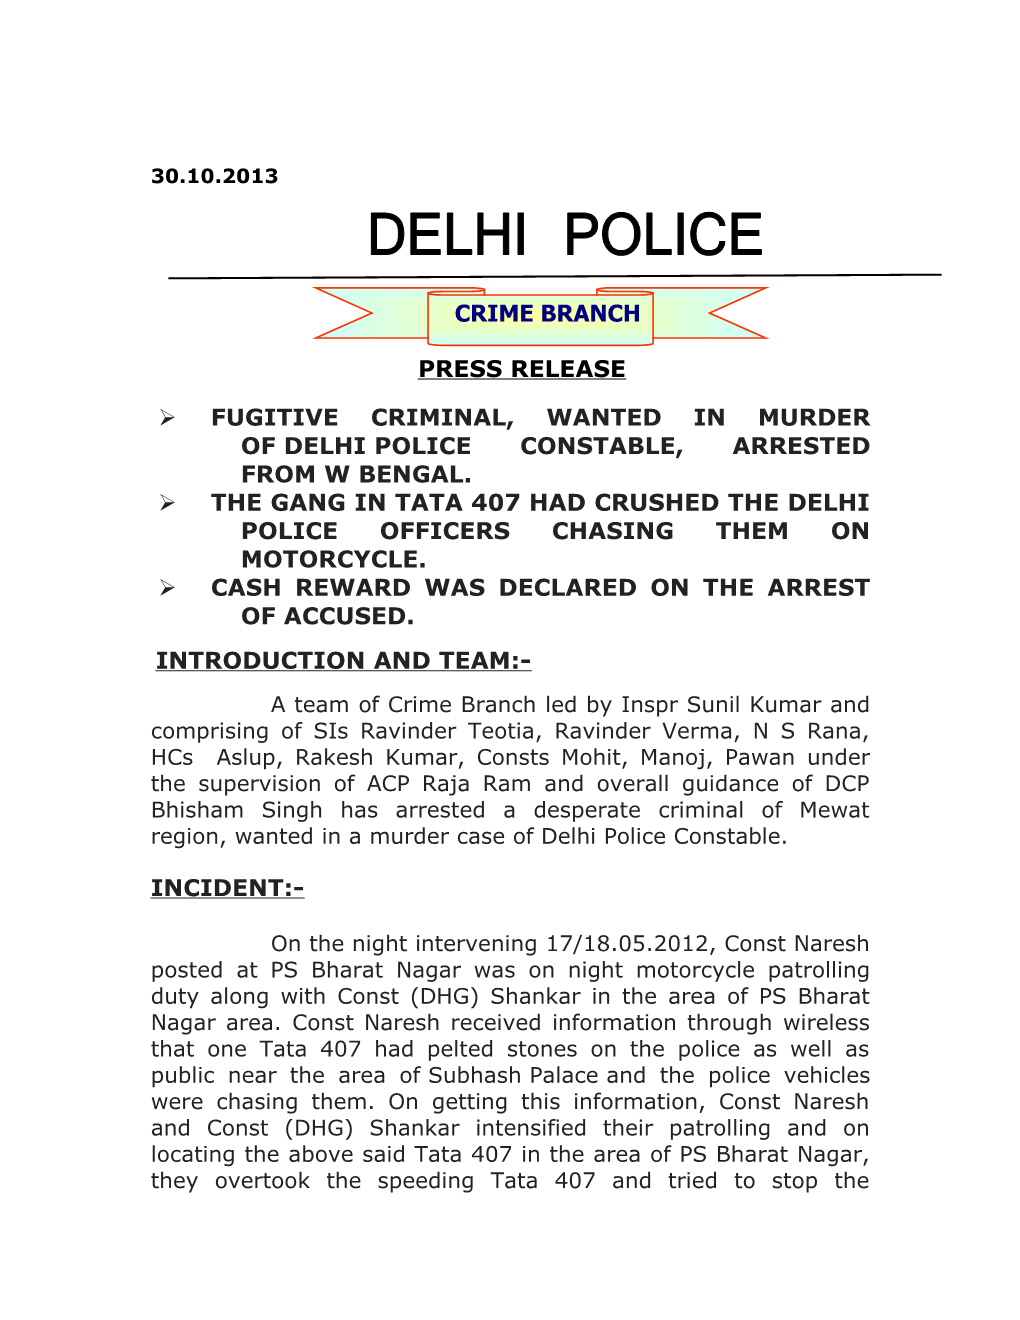 Fugitivecriminal, Wanted in Murder Ofdelhipolice Constable, Arrested from W Bengal